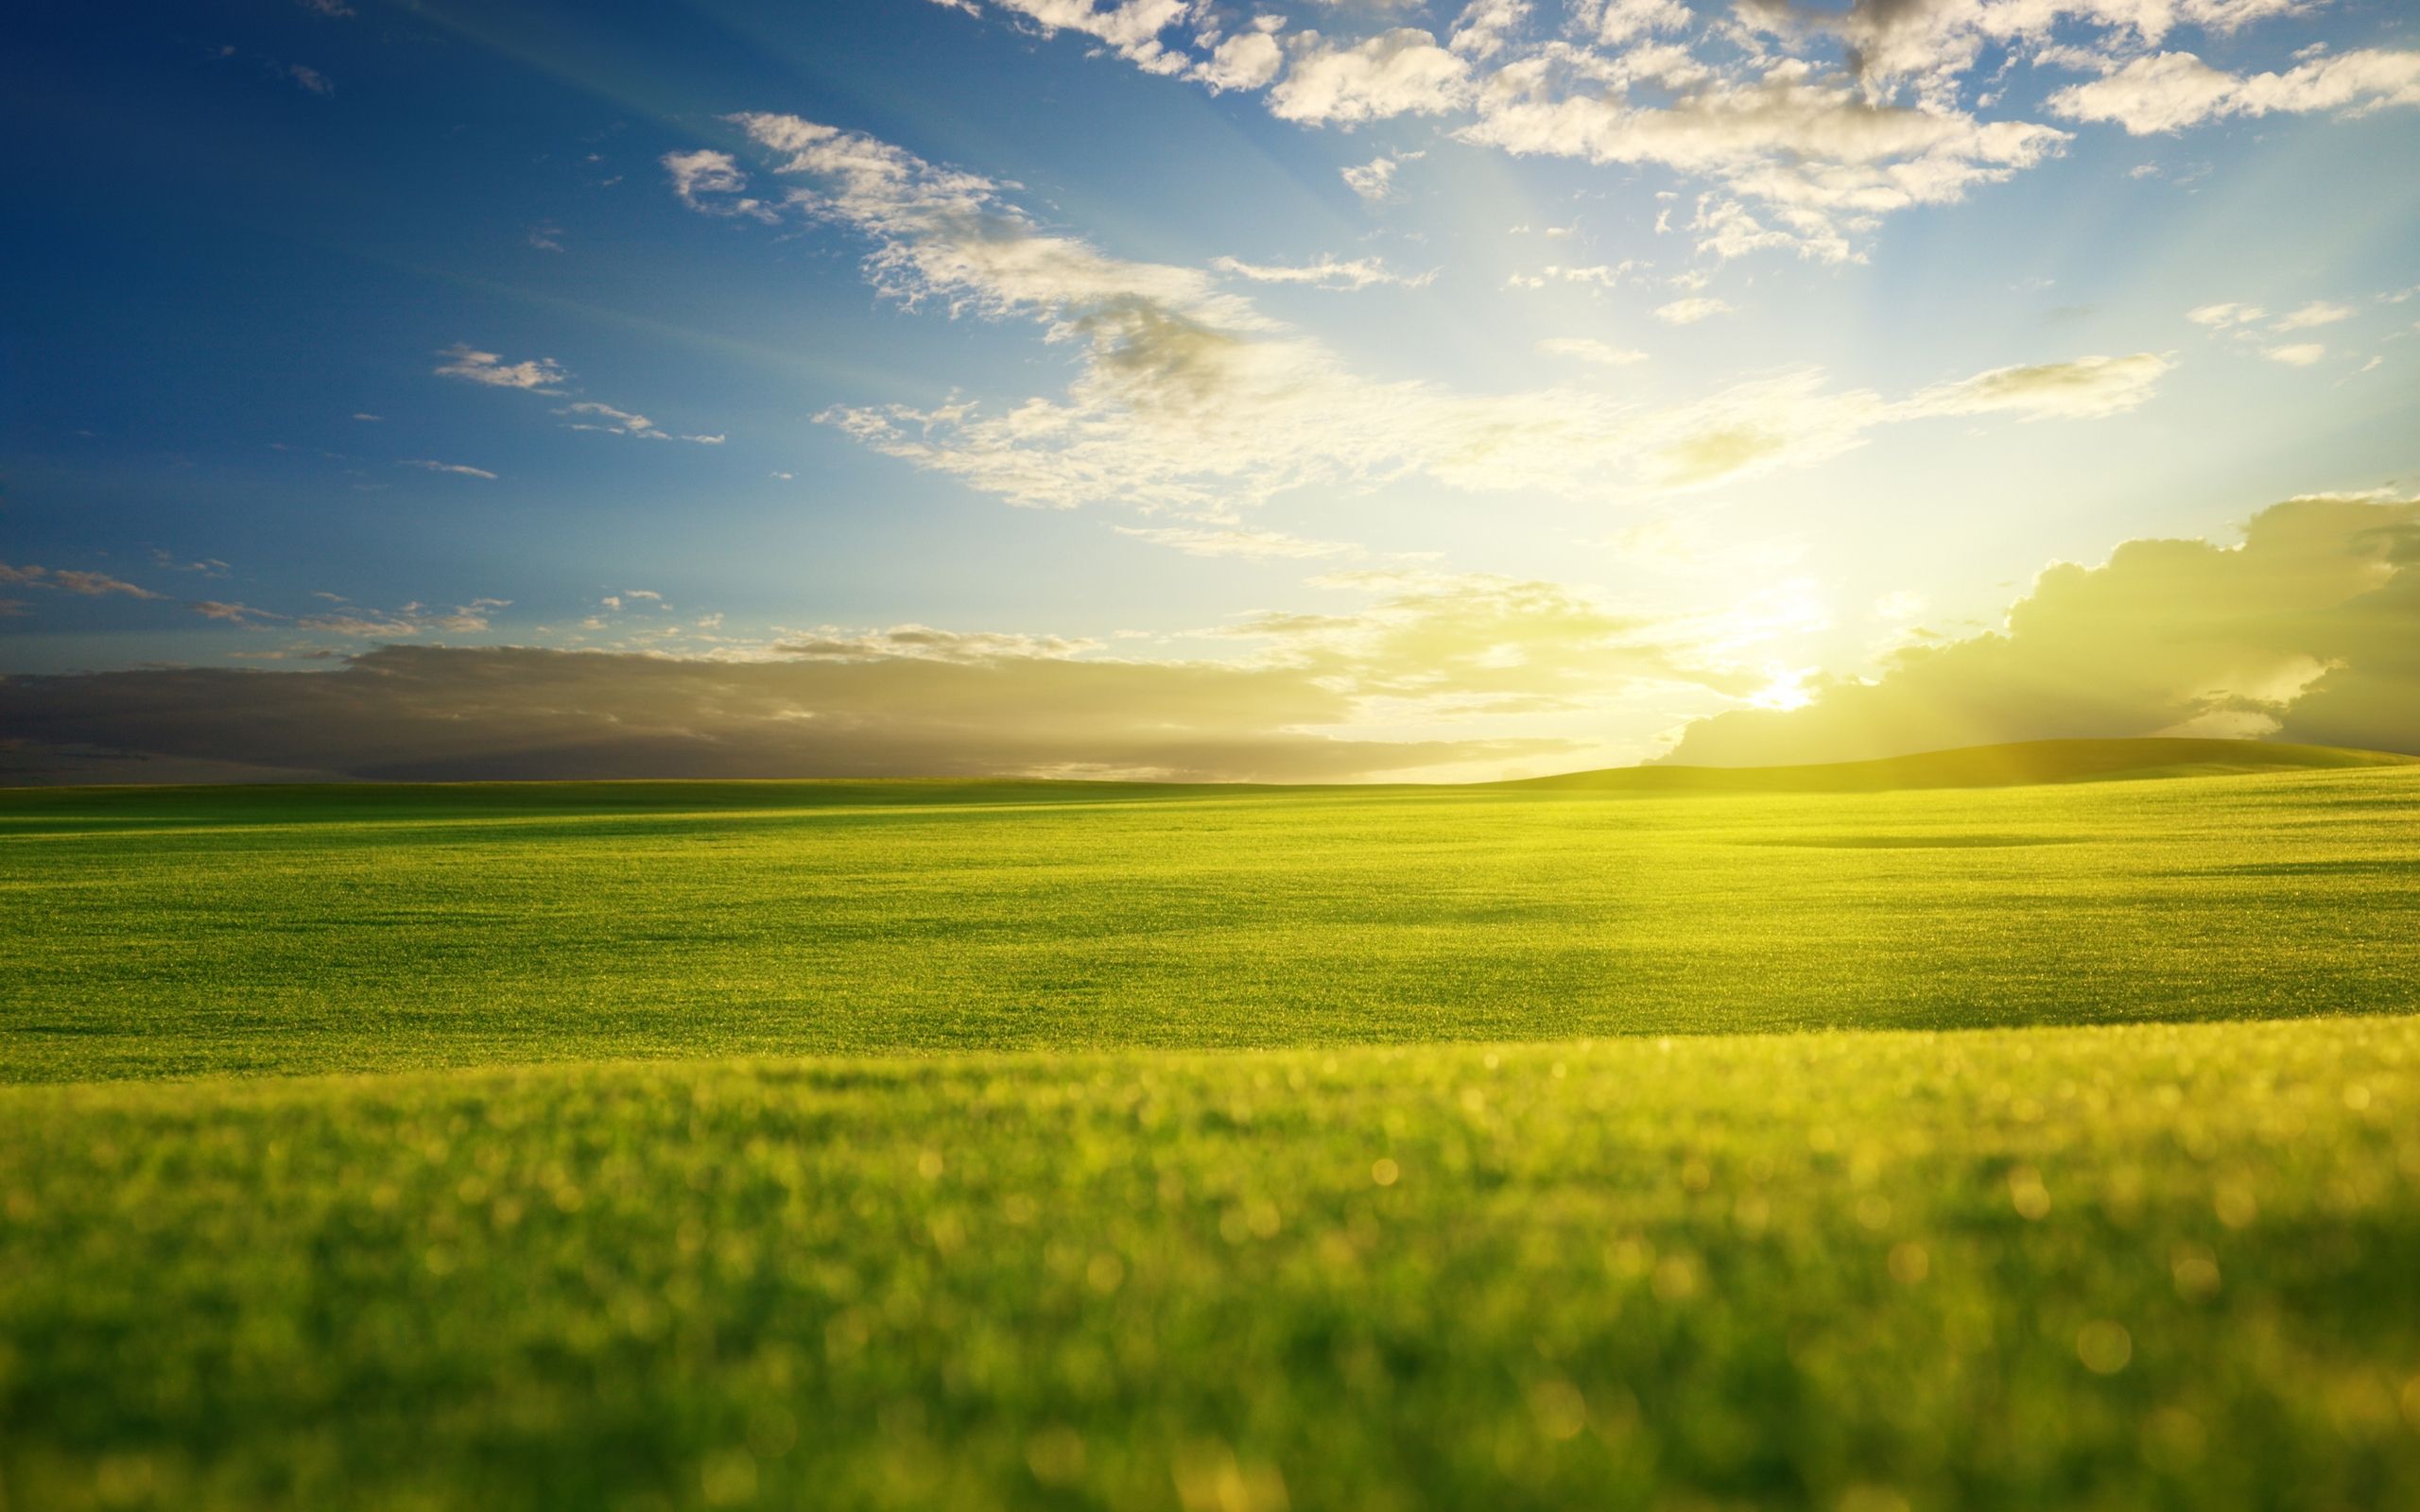 Christian Zennaro: Sunny morning on a spring field wallpaper and image wallpaper